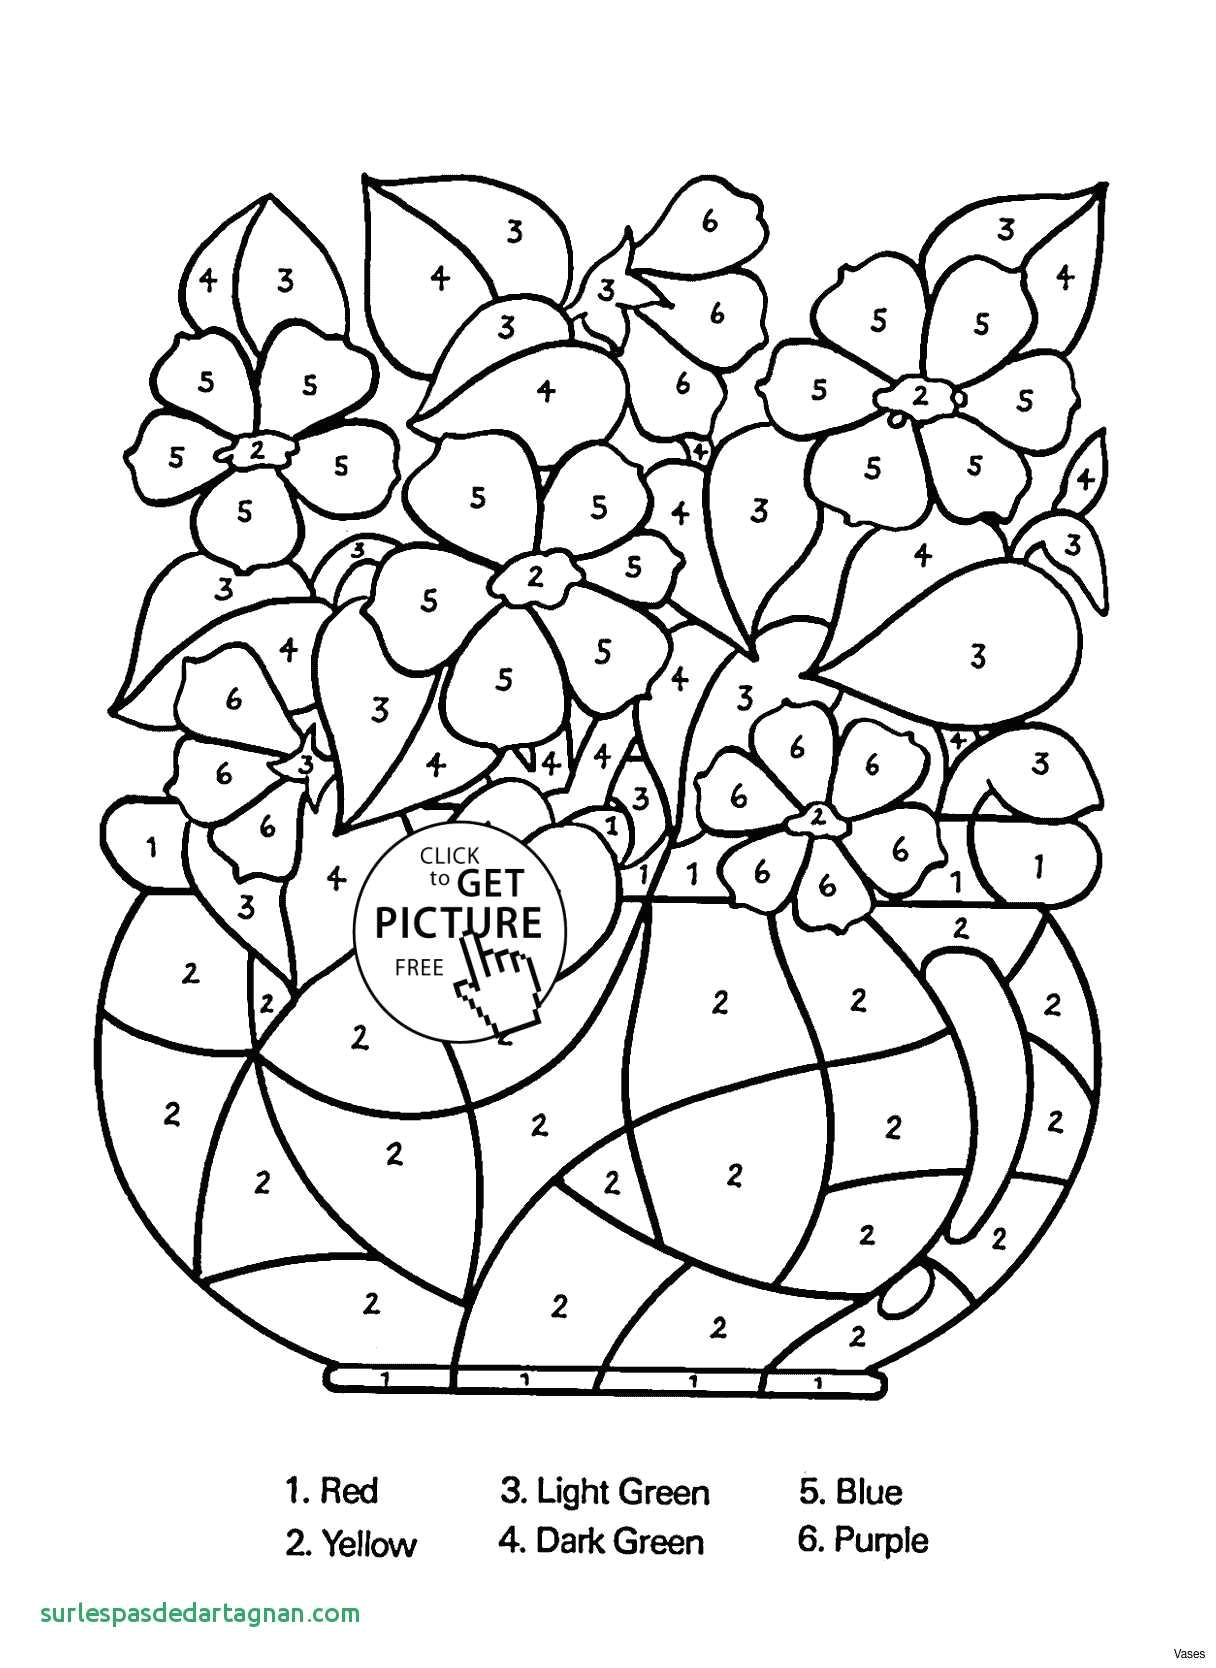 Drawing Of Flowers In Black and White Awesome Cool Patterns Black and White Easy to Draw Www Pantry